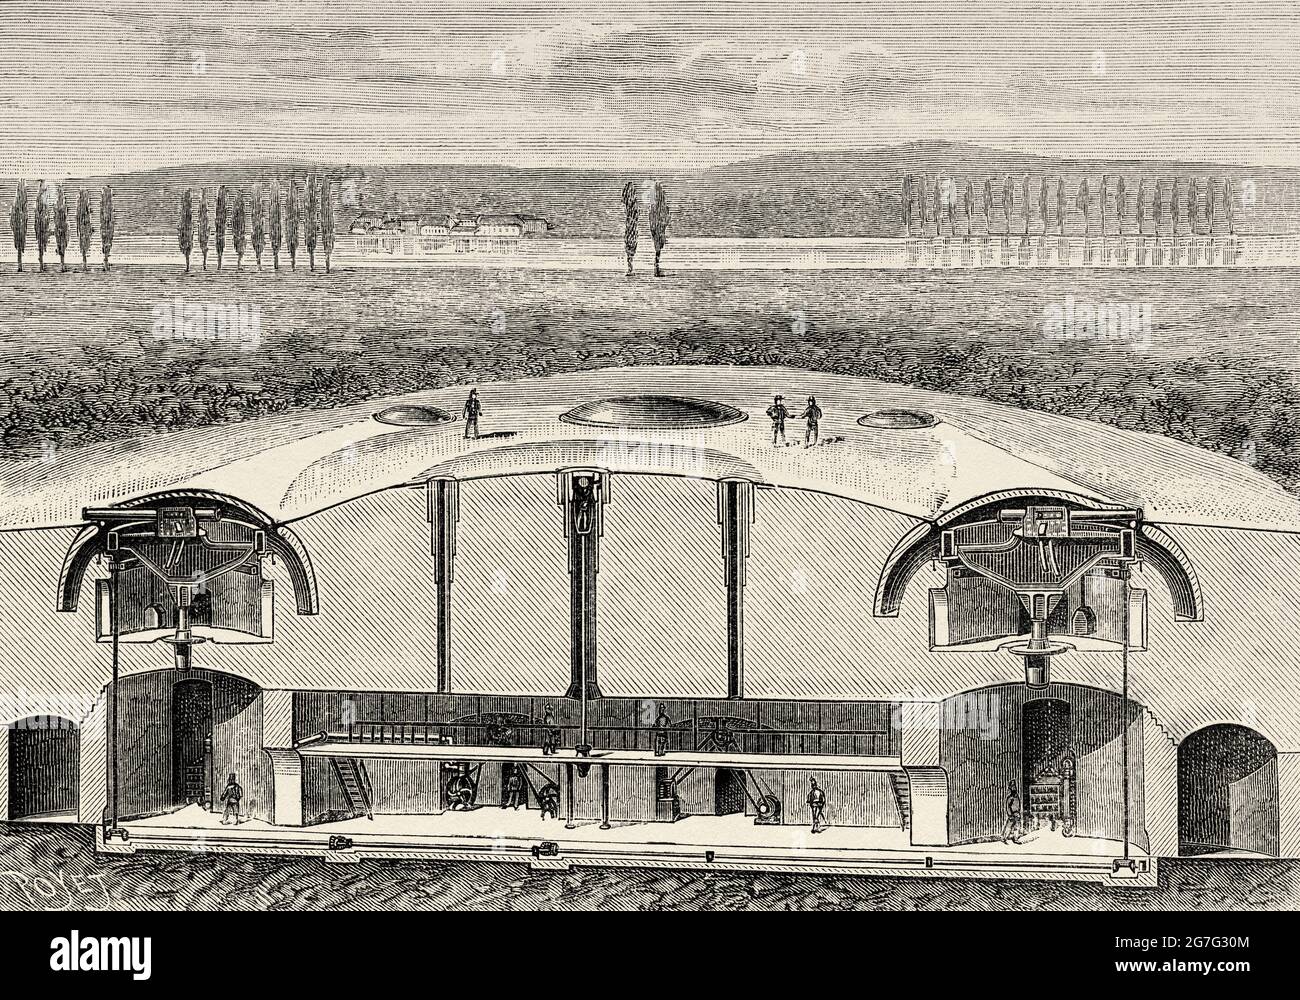 Commander Mougin's Fort de L'Avenir. Plan of the front of the underground fort and cut by the two large turrets at the rear. Old 19th century engraved illustration from La Nature 1888 Stock Photo